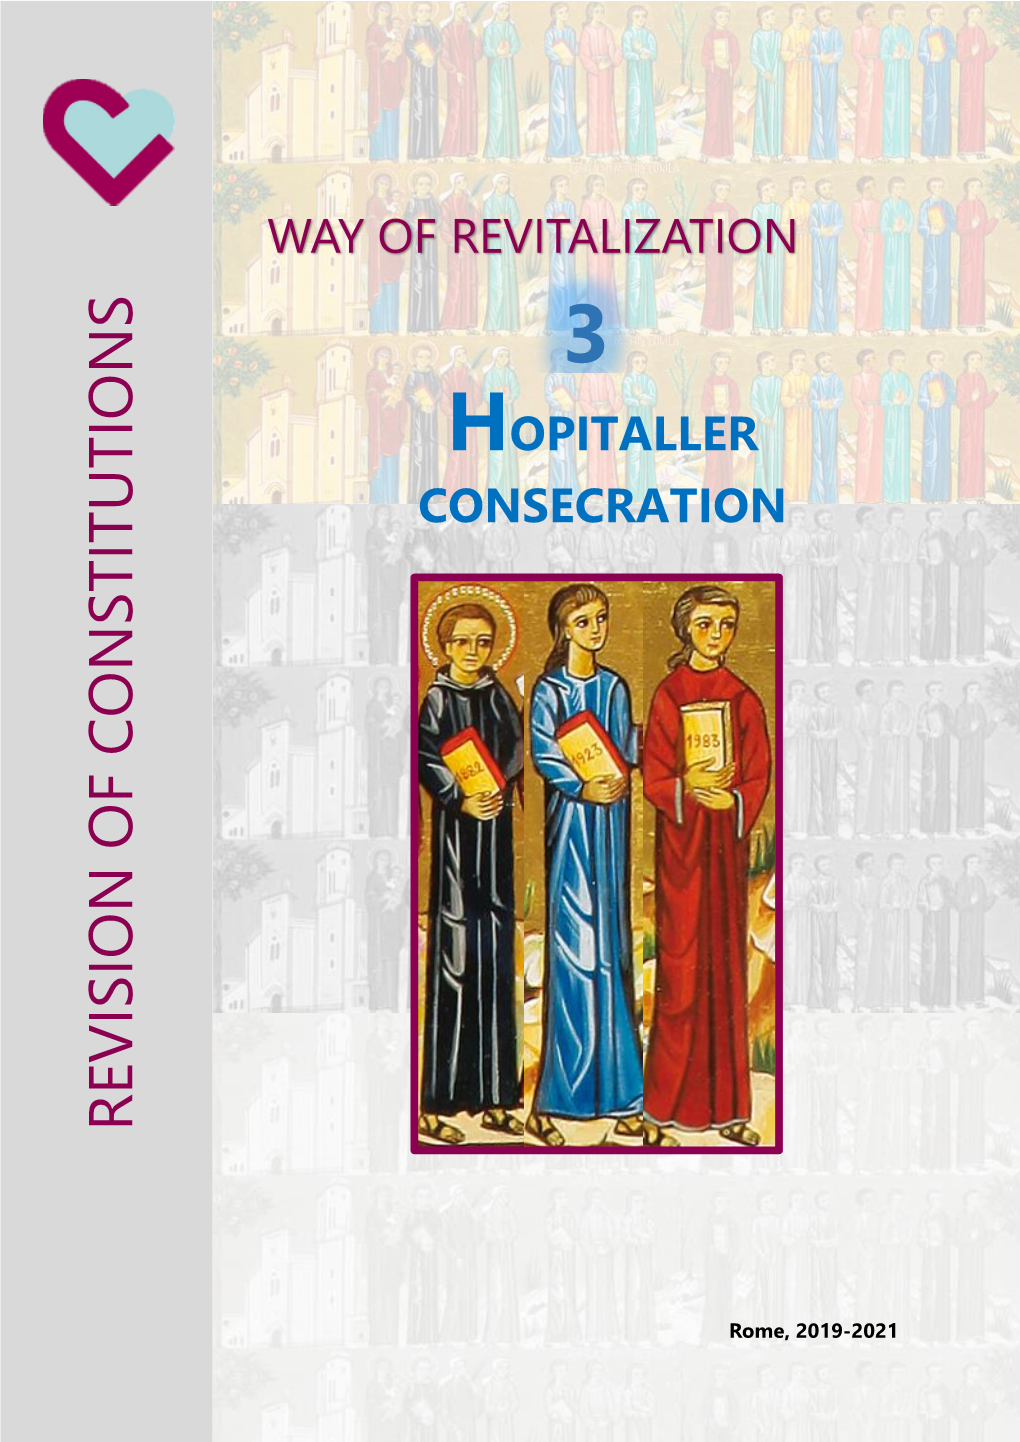 Hospitaller Consecration Leads Us to Identify with the Compassionate and Merciful Christ, and Typifies the Practice of the Evangelical Counsels